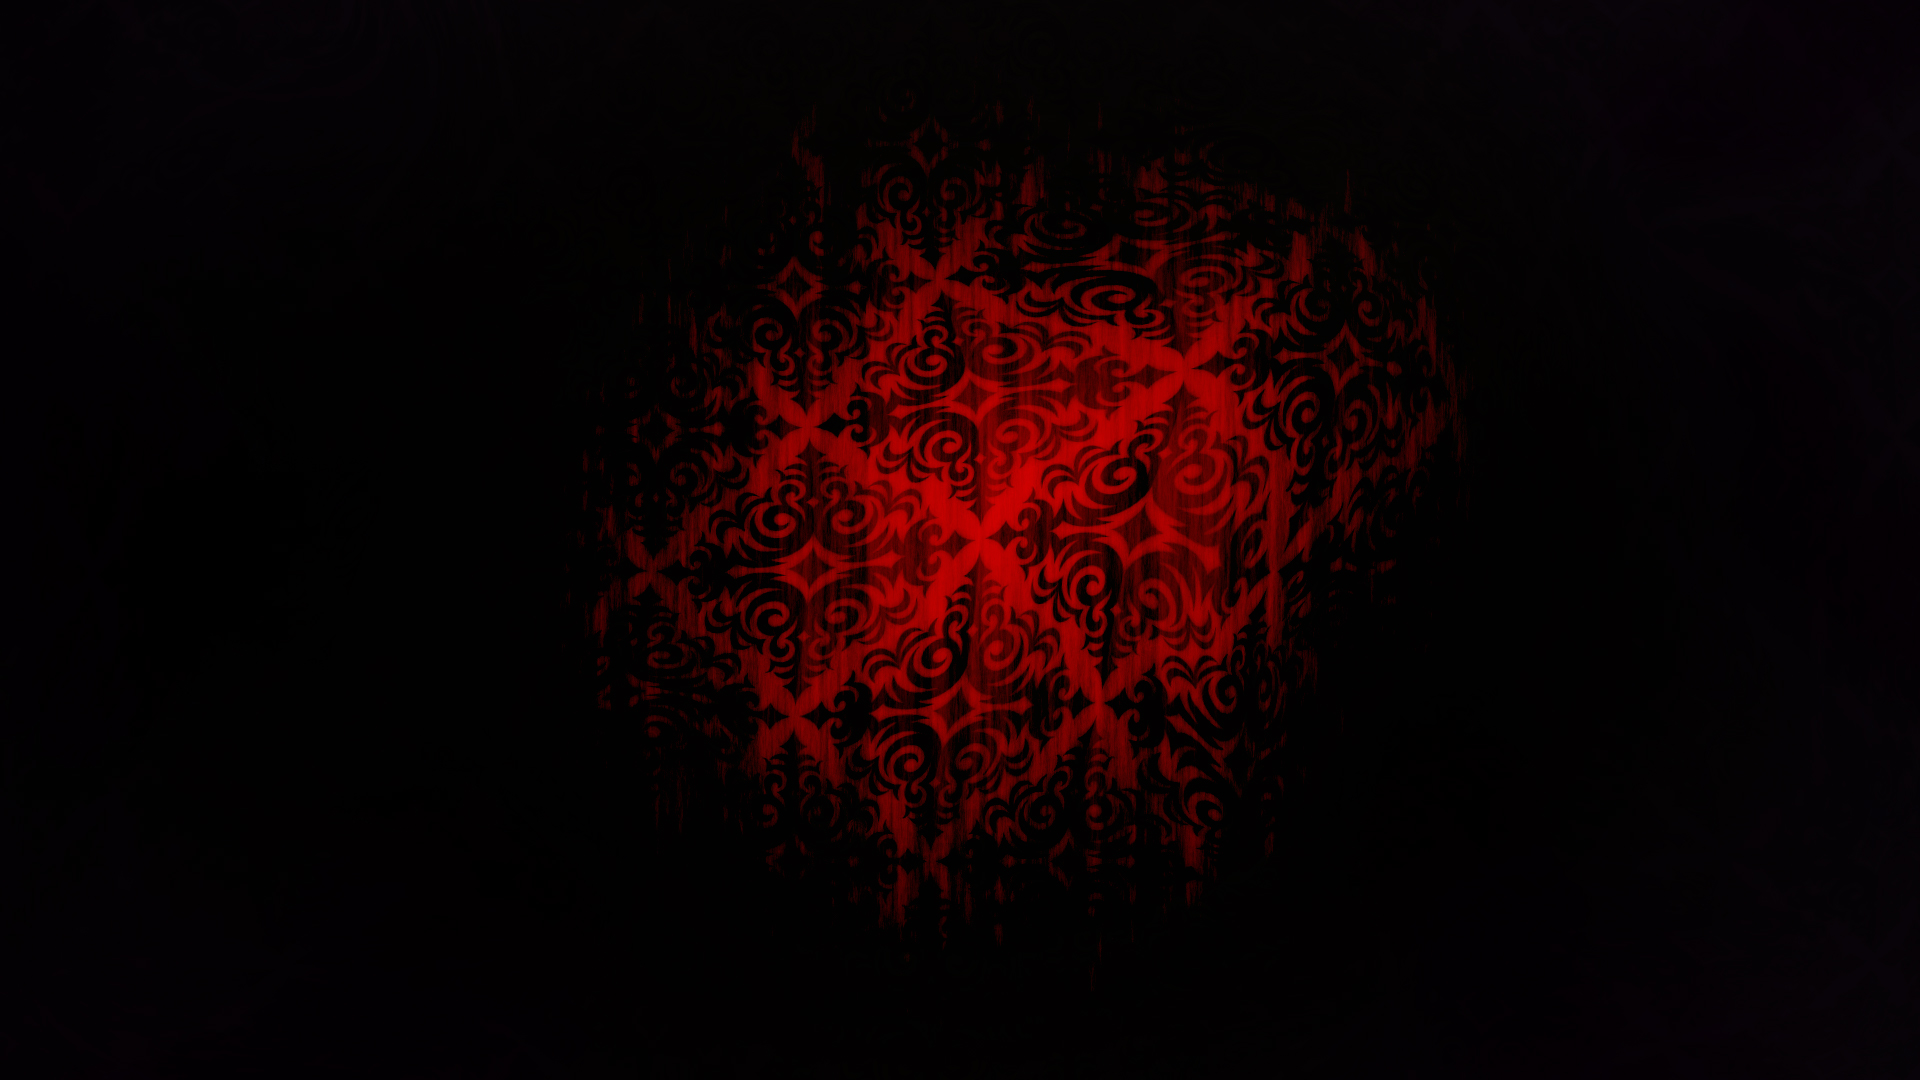 File:Witchcraft Blood Red Abstract Magical Fabric Deep Dark Background   - Wikimedia Commons